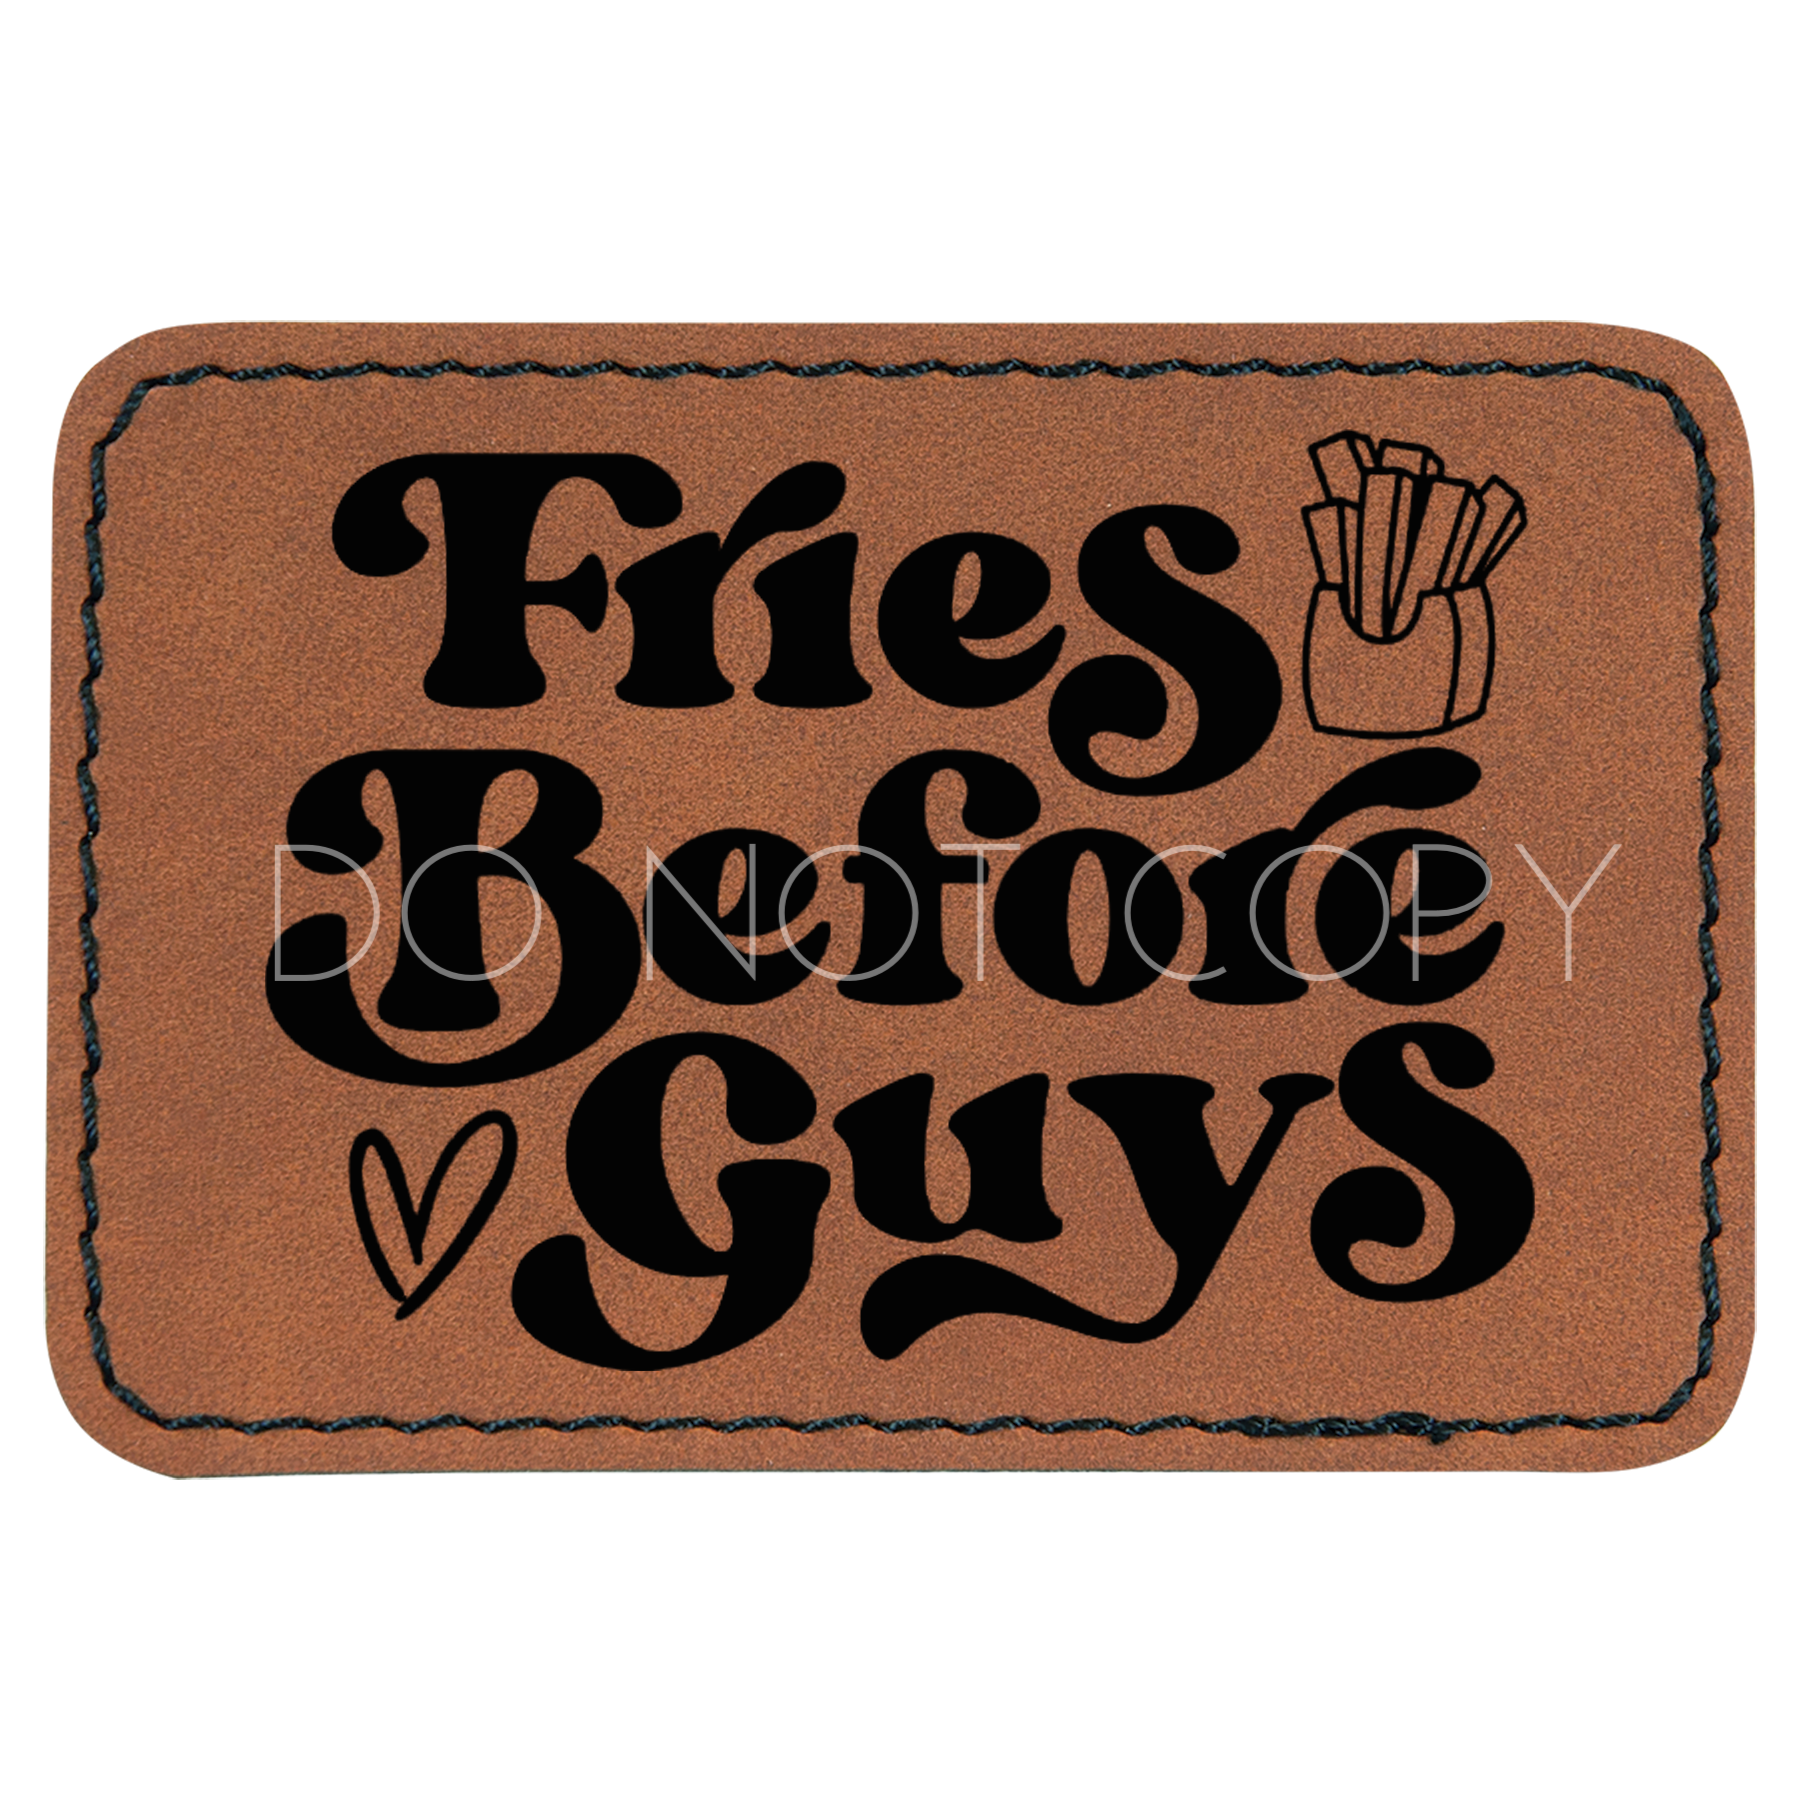 Fries Before Guys Patch